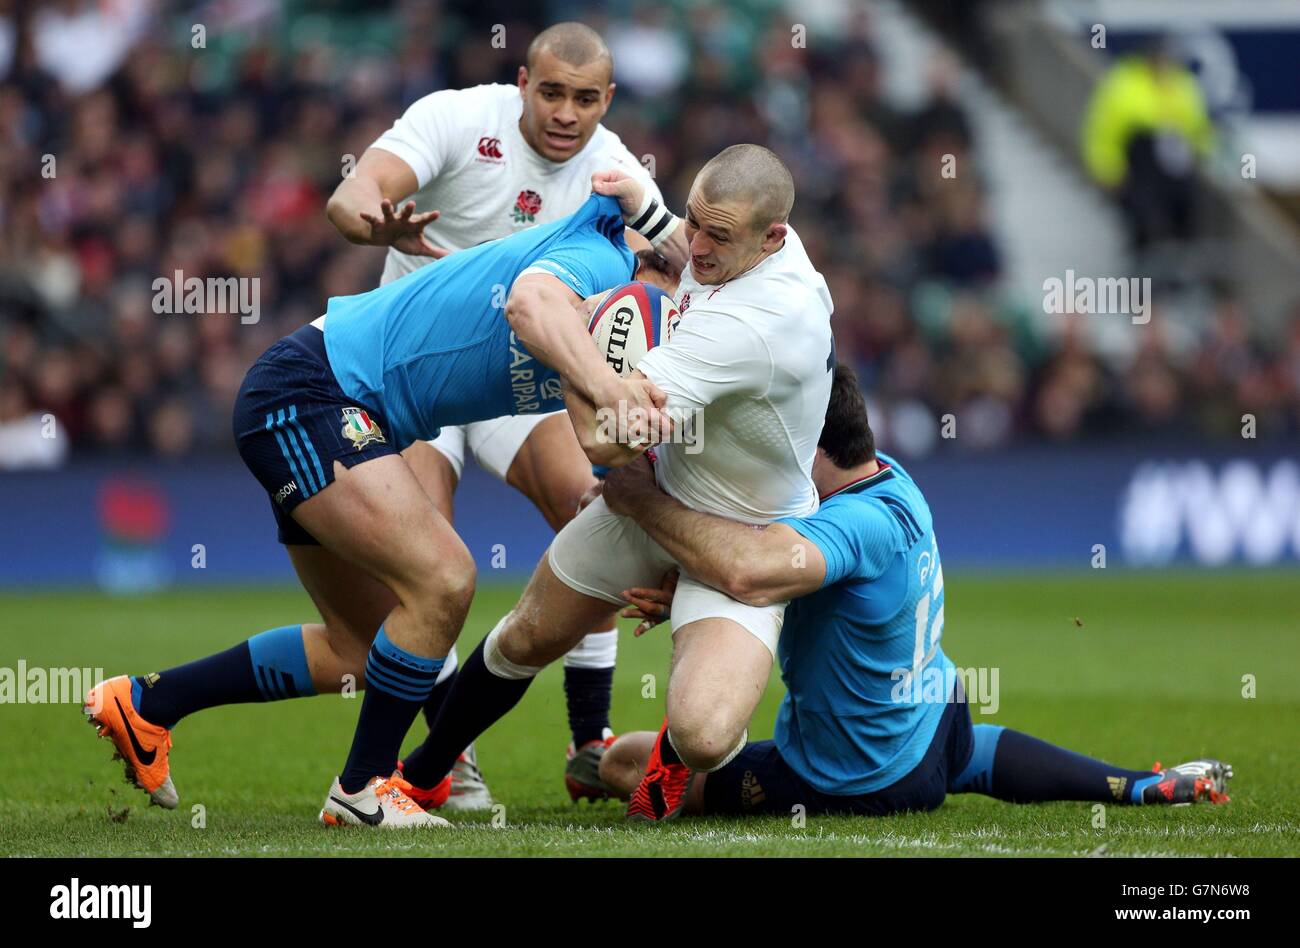 Rugby Union - 2015 RBS Six Nations - England v Italy - Twickenham. England's Mike Brown is tackled by Italy's Luca Morisi (left) and Andrea Masi (right) during the 6 Nations match at Twickenham, London. Stock Photo